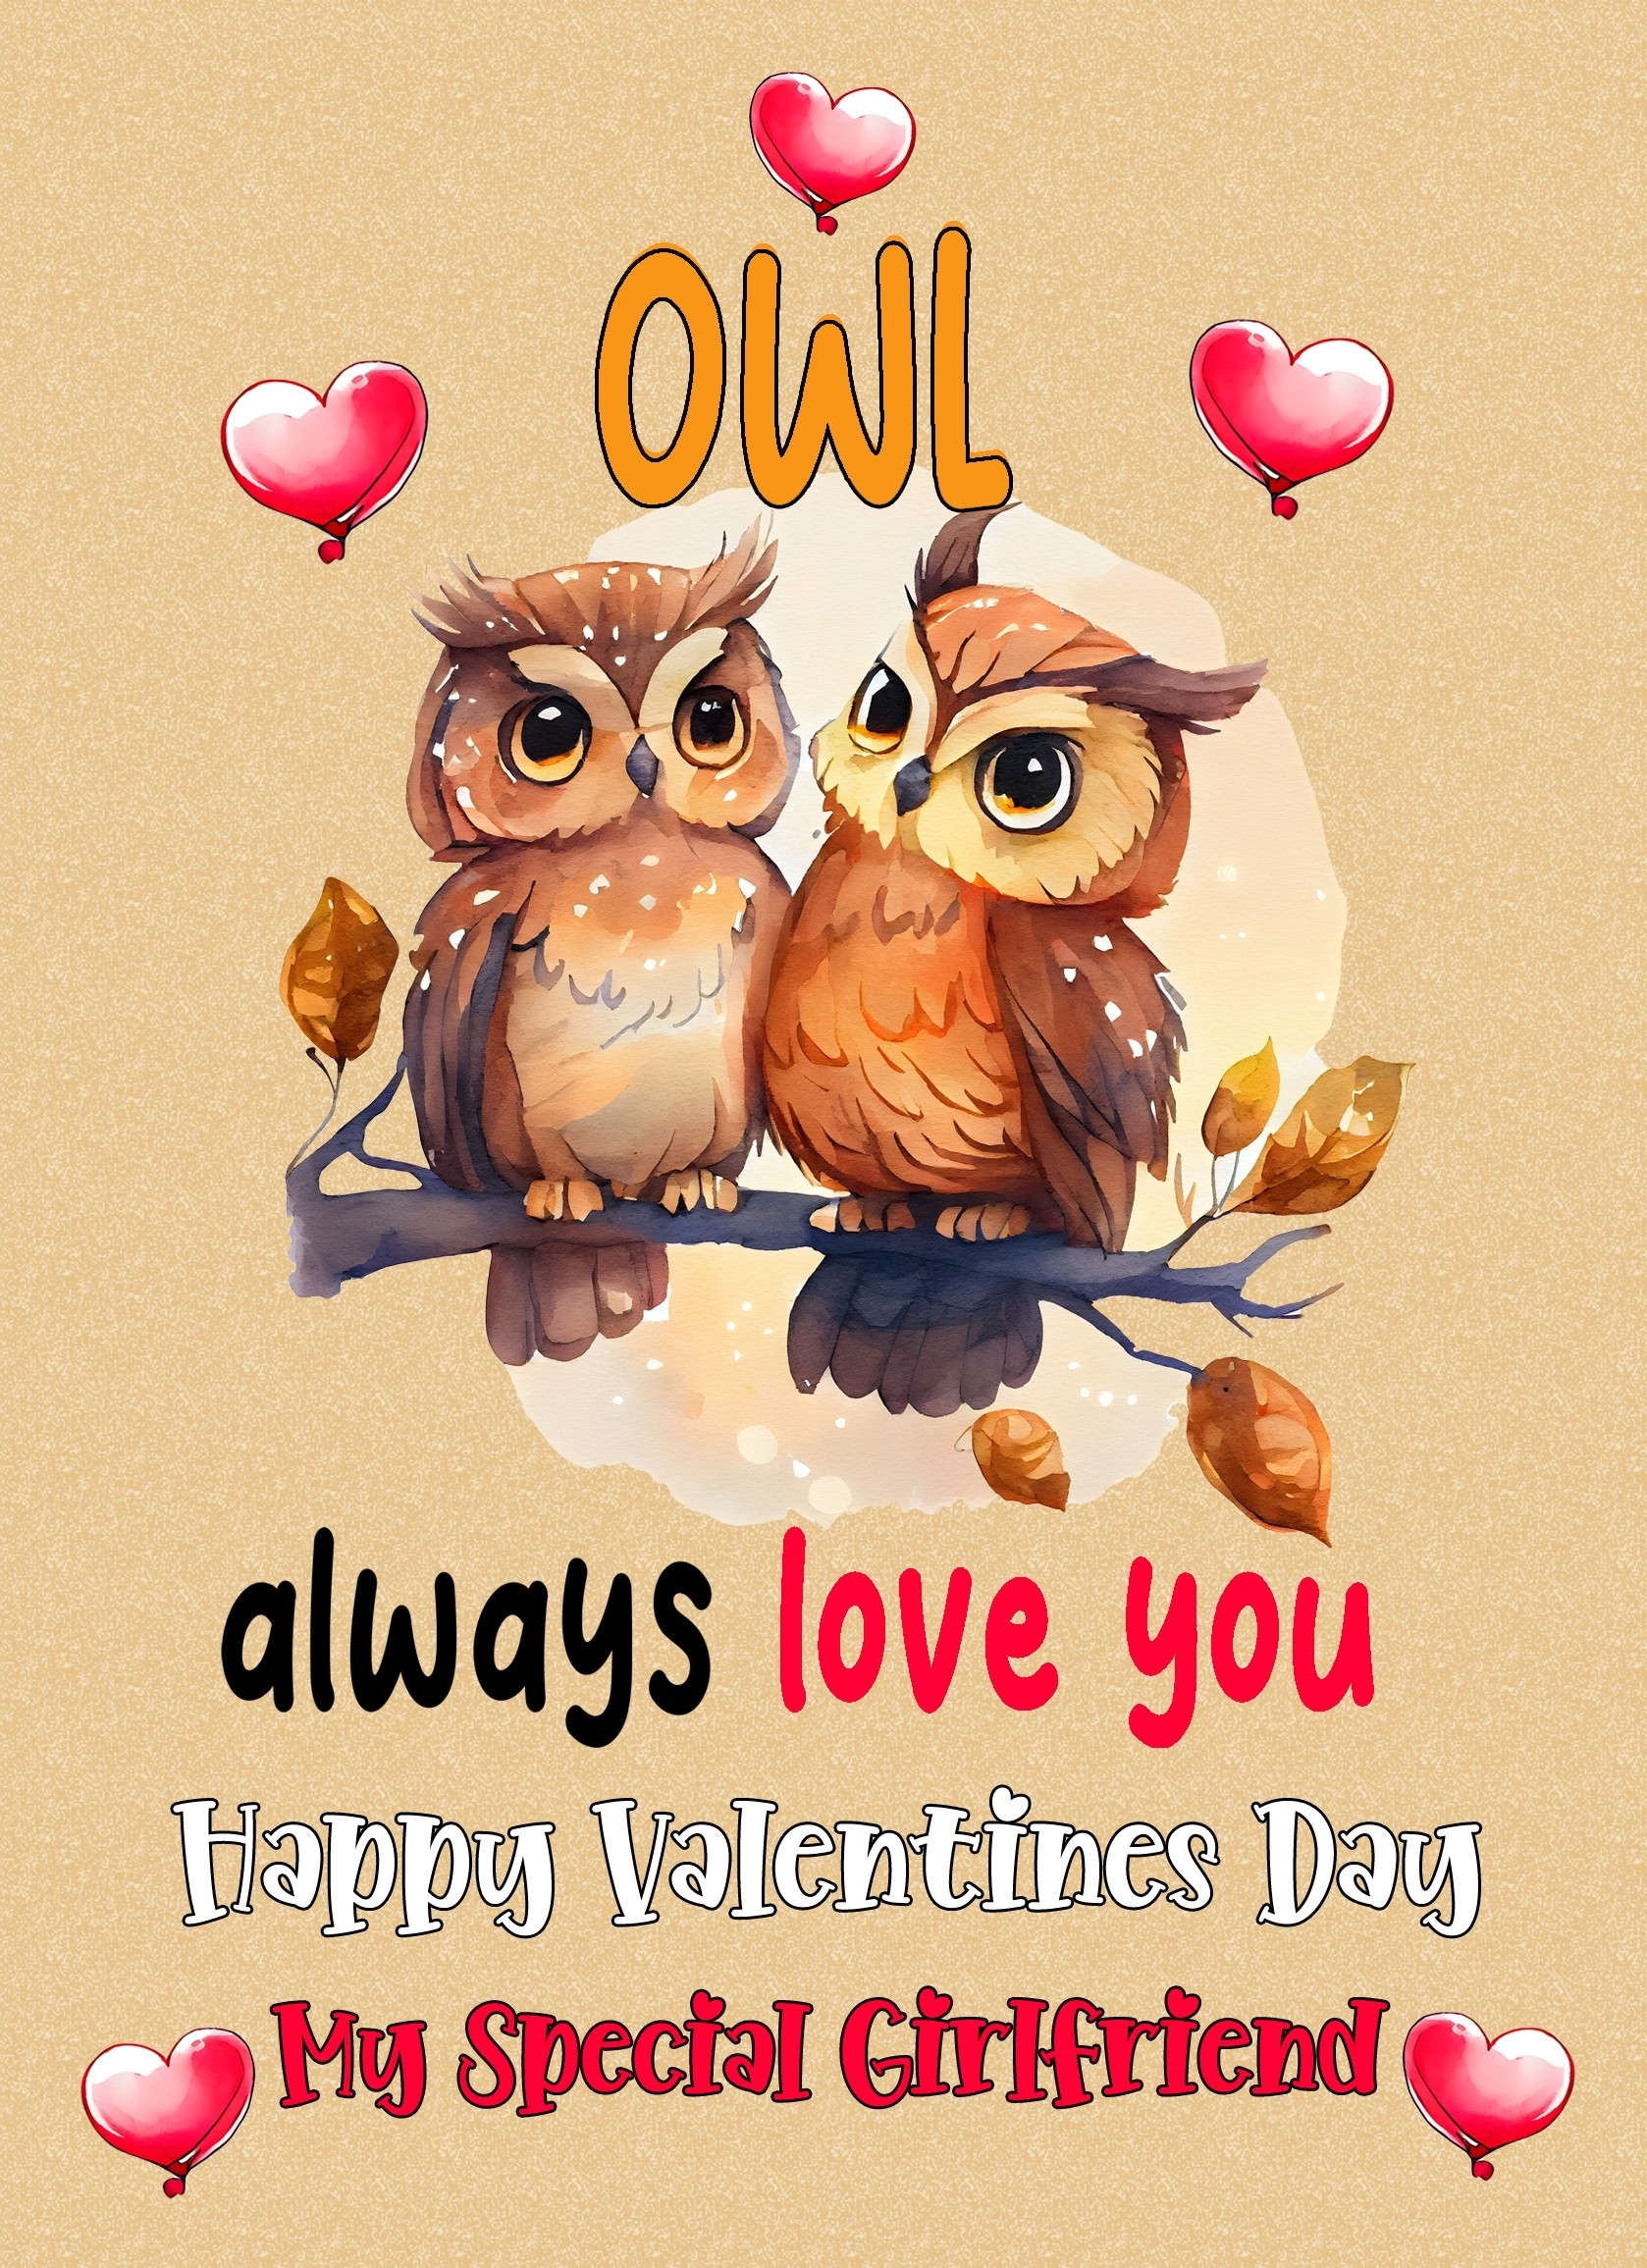 Funny Pun Valentines Day Card for Girlfriend (Owl Always Love You)